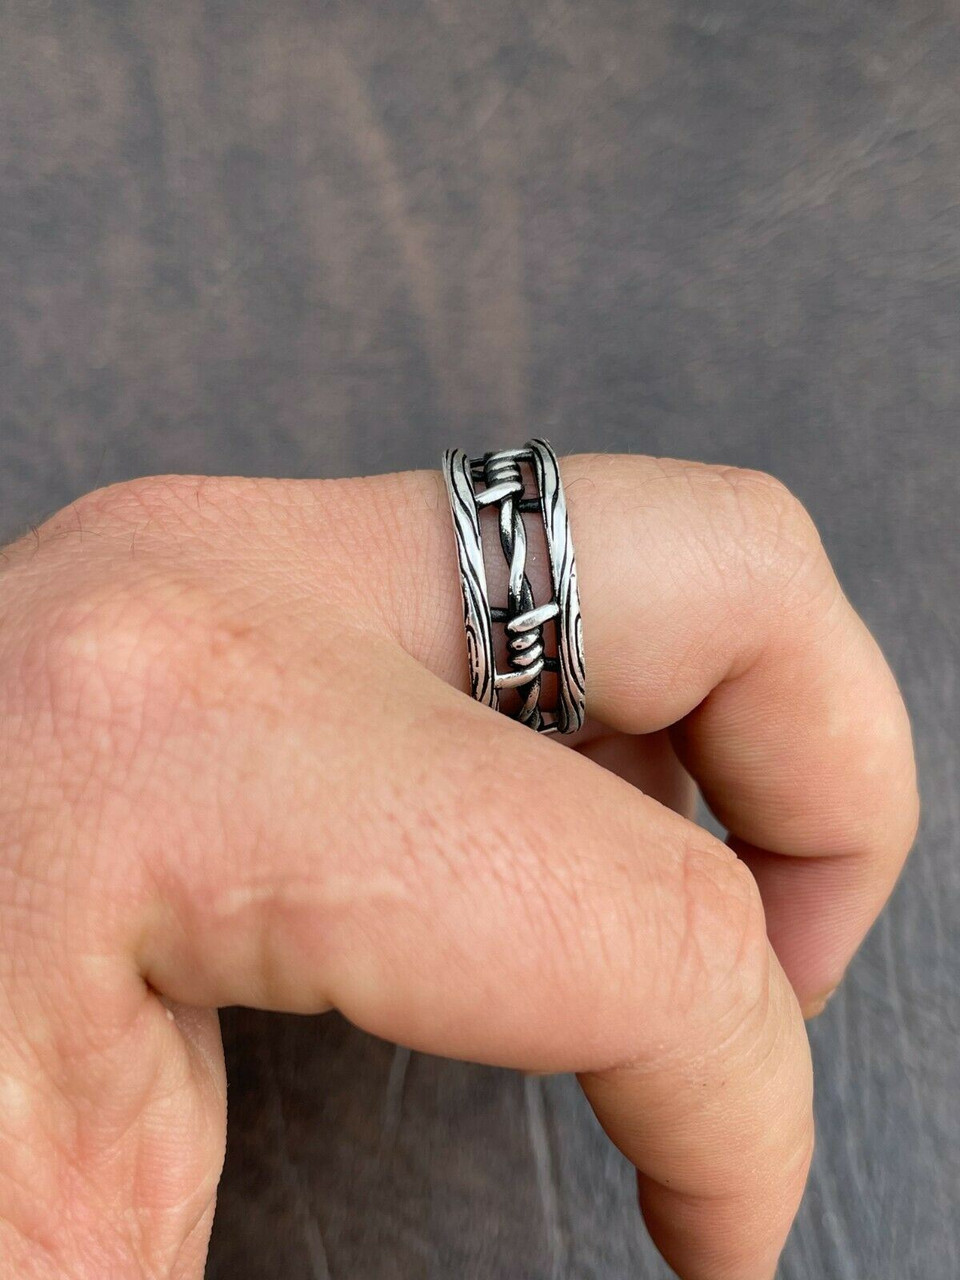 RAZOR WIRE BAND RING in stainless steel BY SEVEN50 – SEVEN50